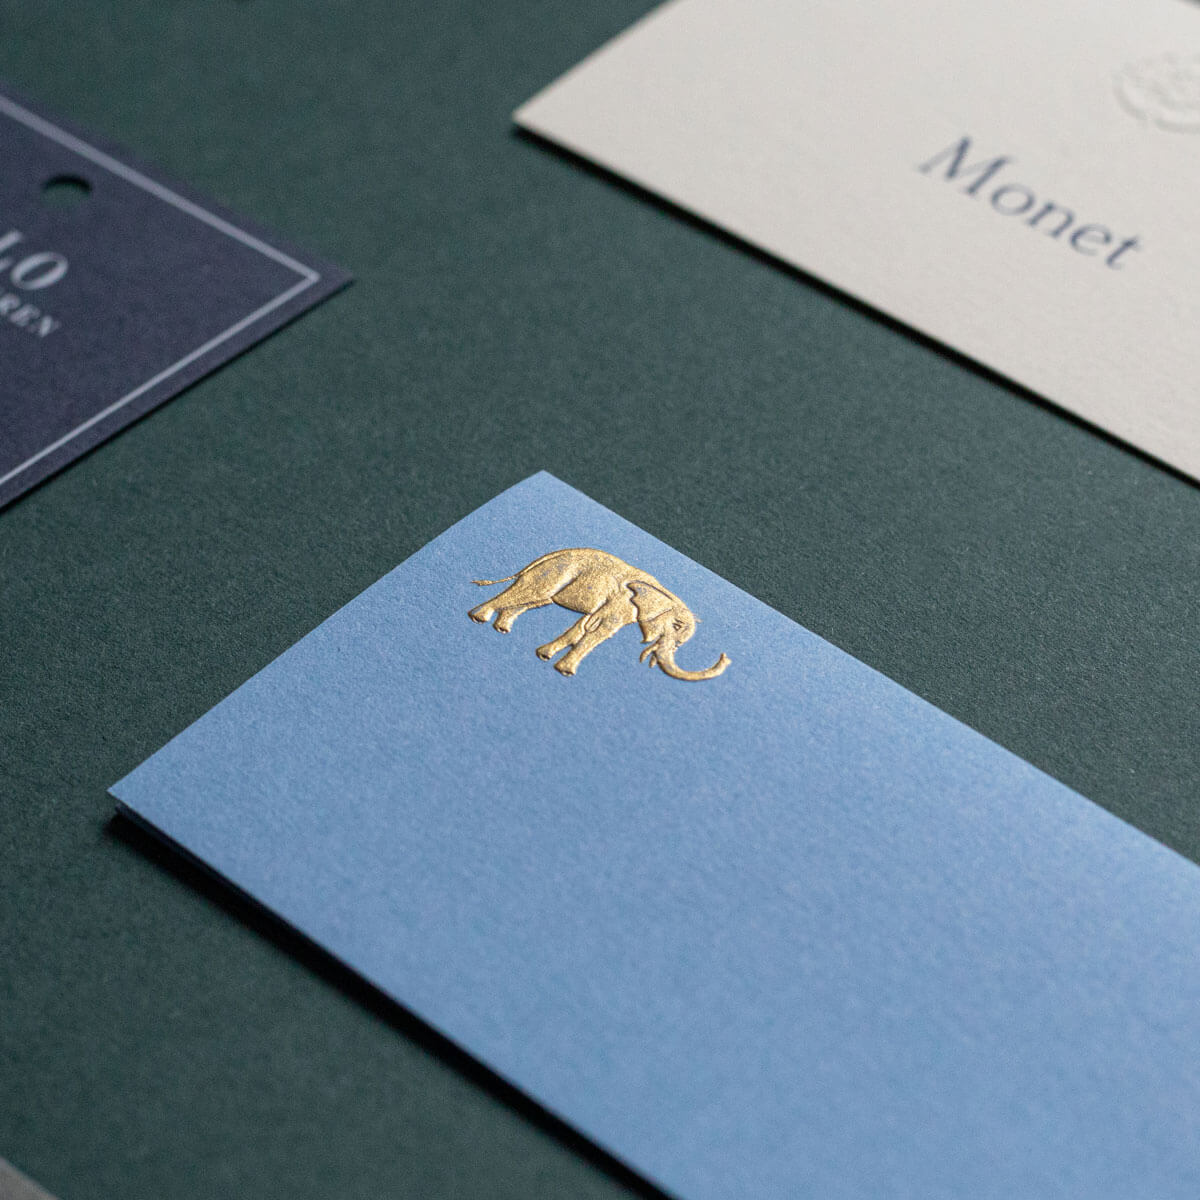 gold embossed die stamped elephant engraved onto blue business cards